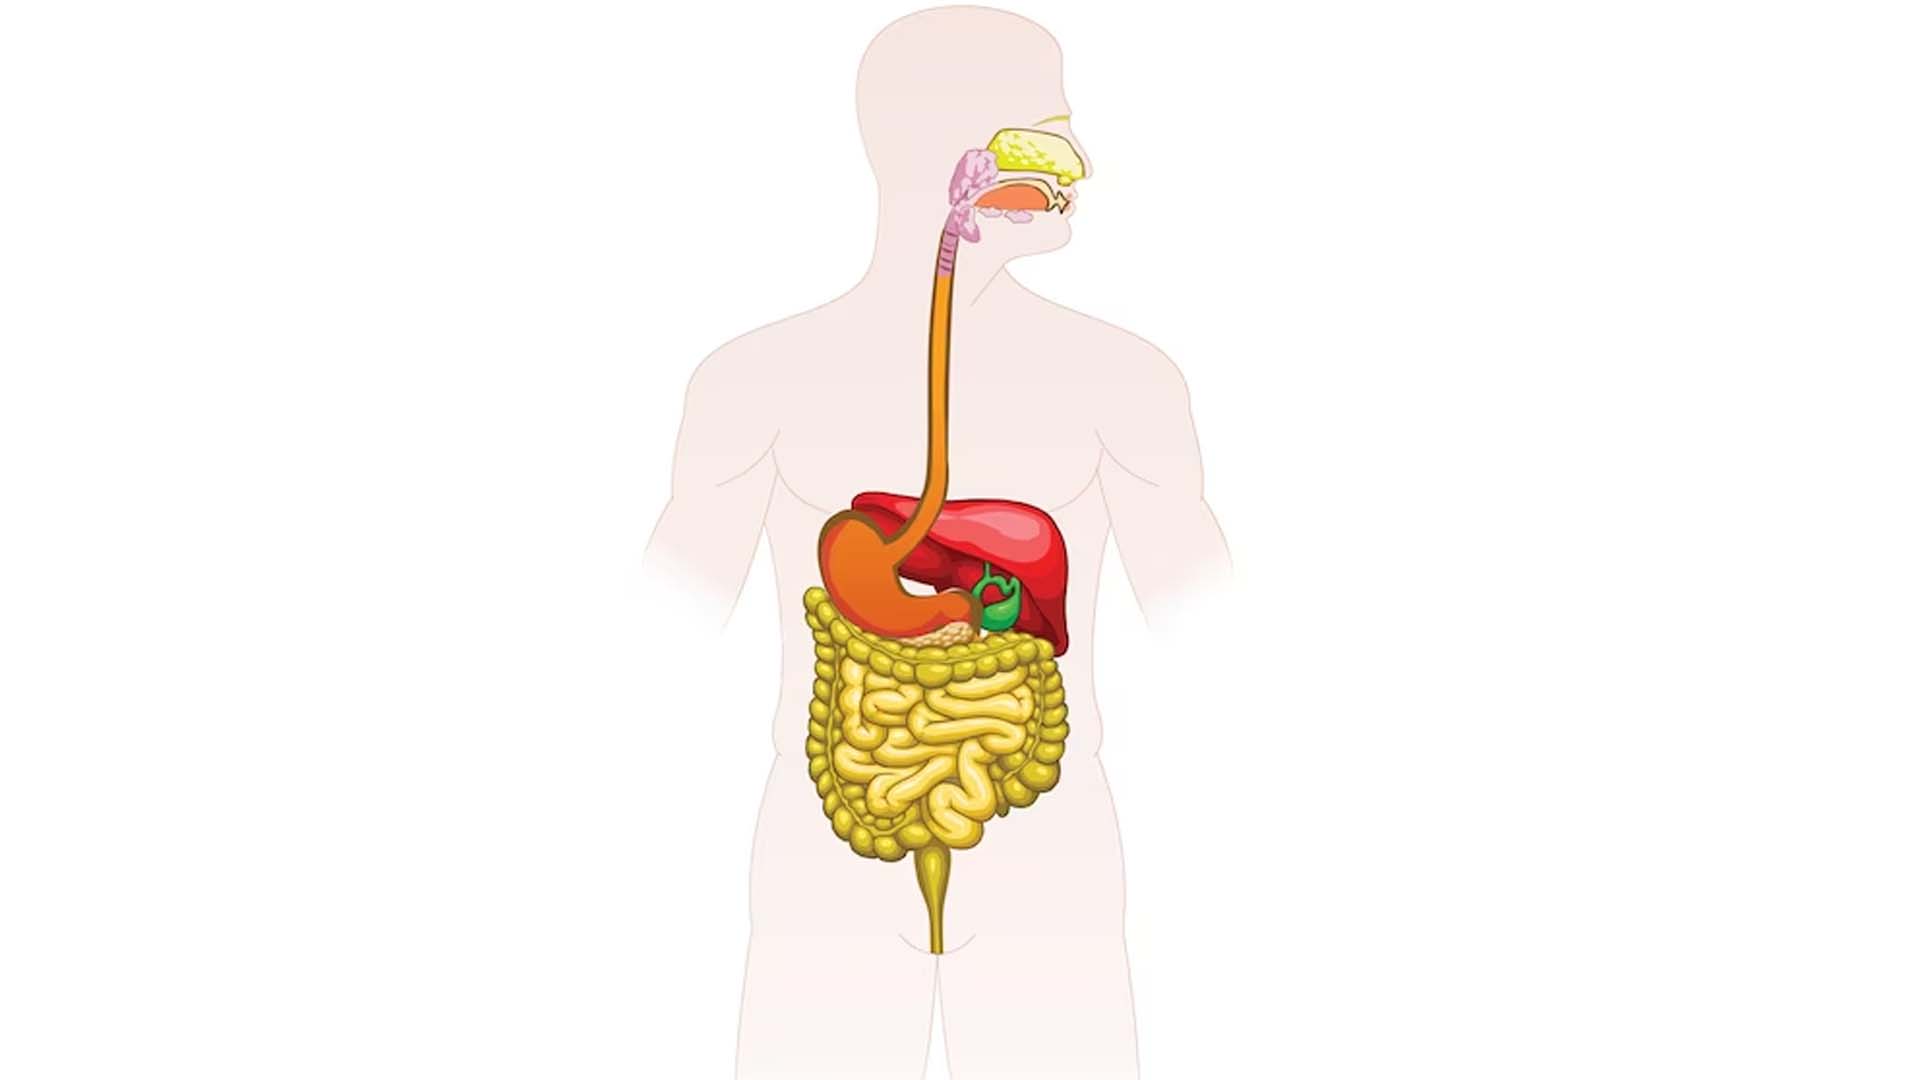 Digestive tract or gastrointestinal (GI) tract